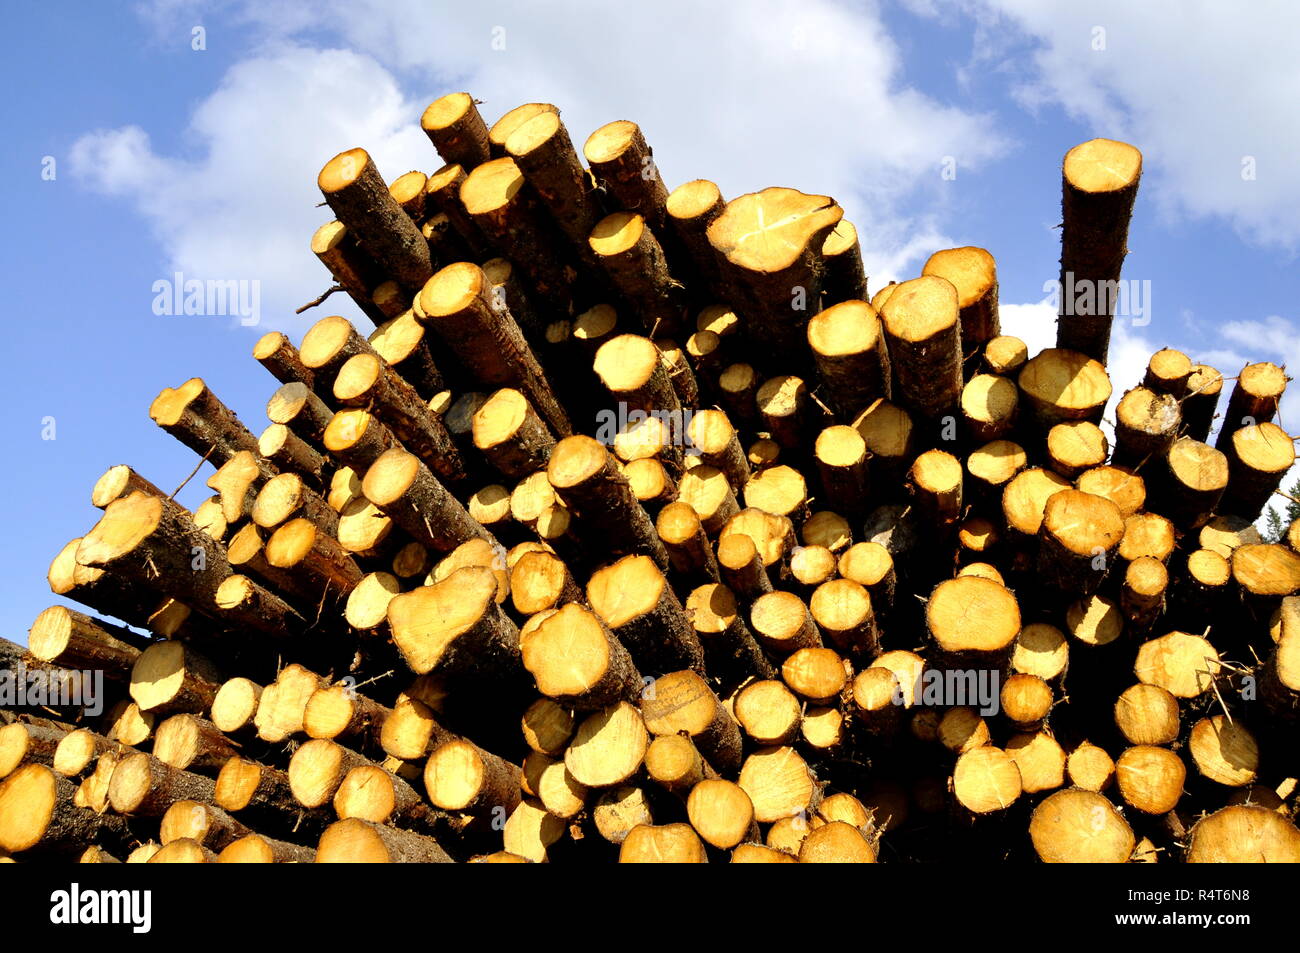 Pile of timber logs laying in a forest Stock Photo